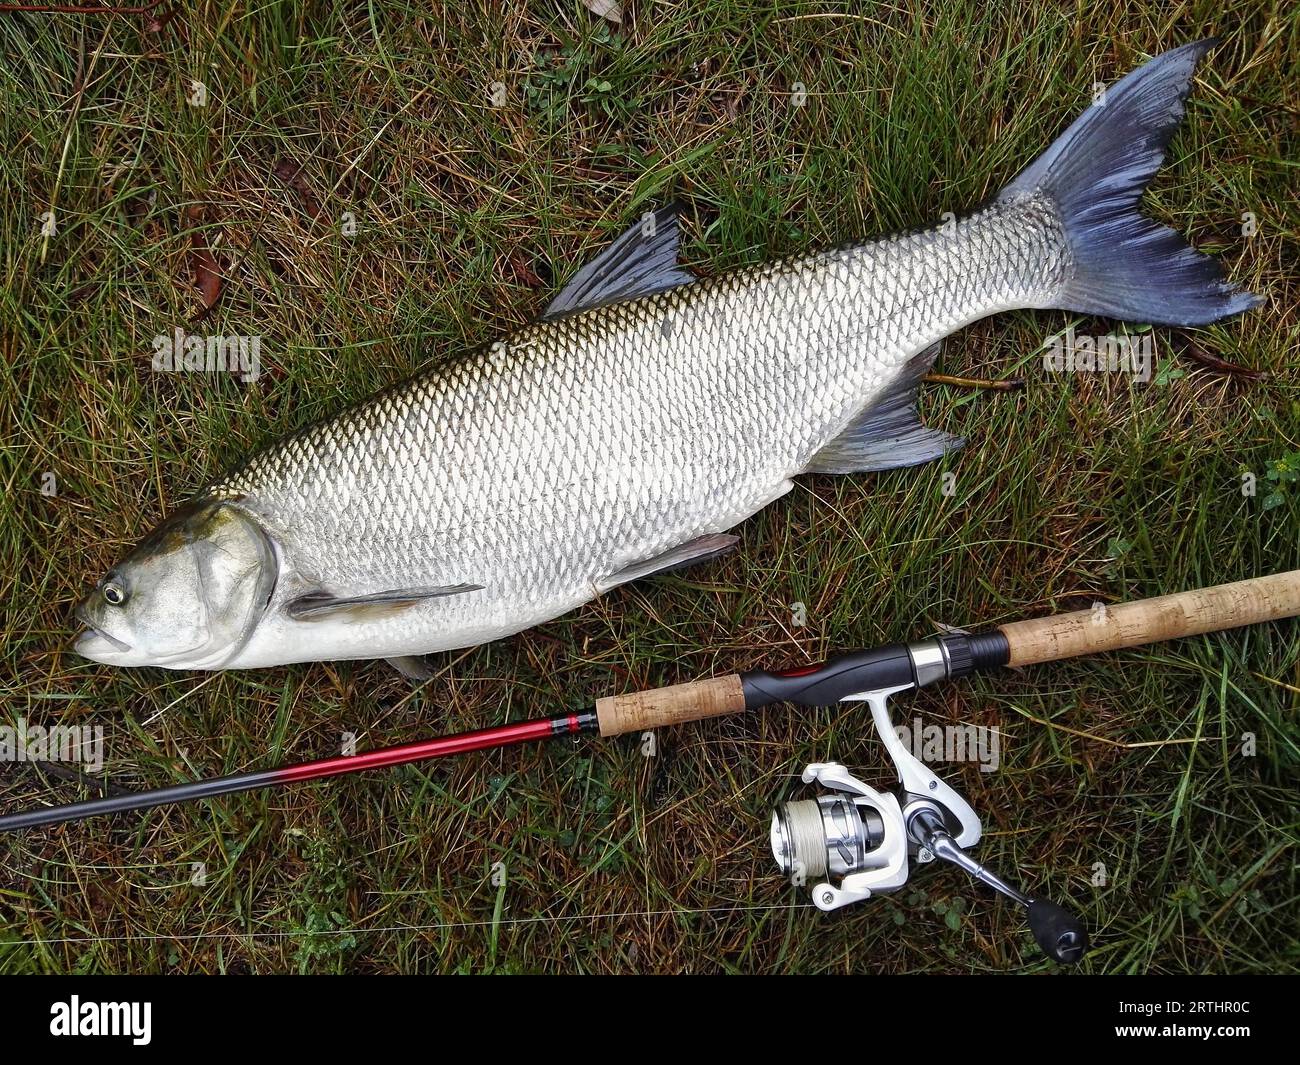 Asp caught with a spinning rod Stock Photo